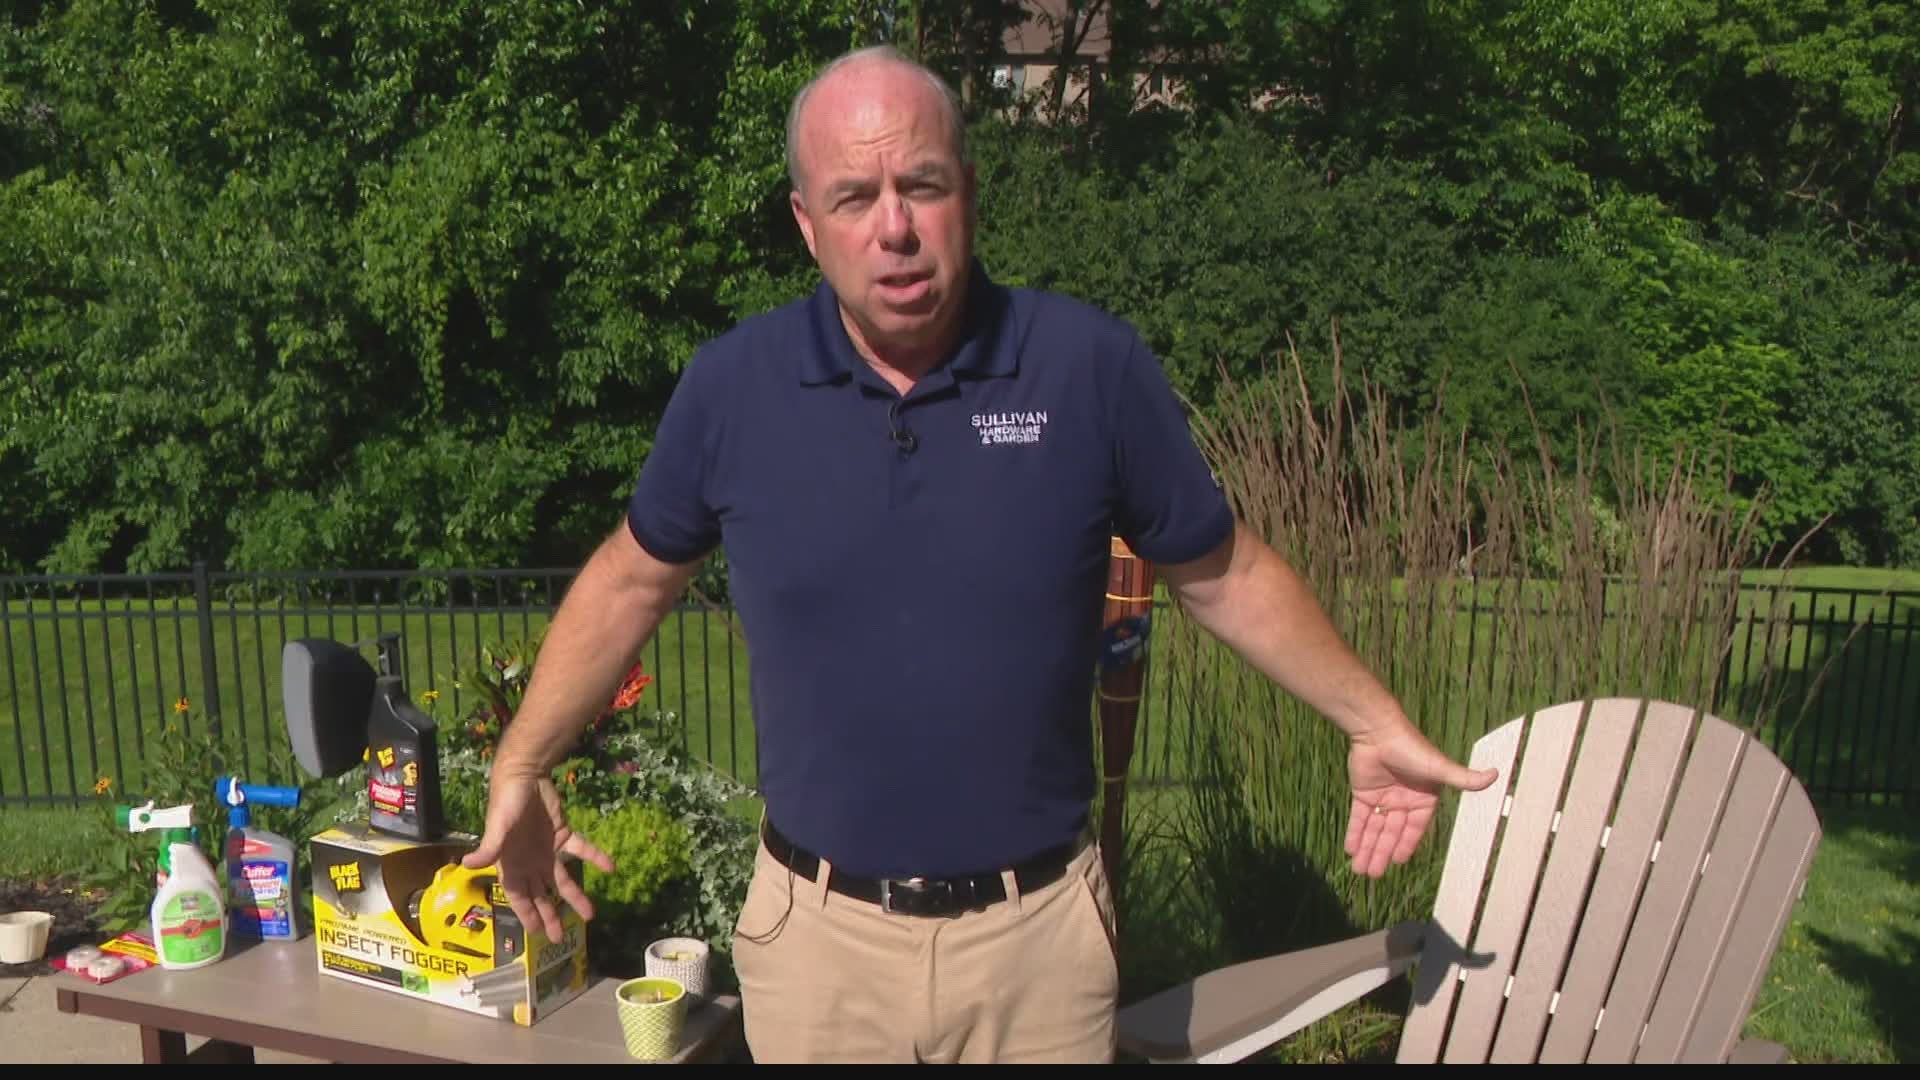 Pat Sullivan shares tips on how to avoid mosquitos on July 4 weekend.